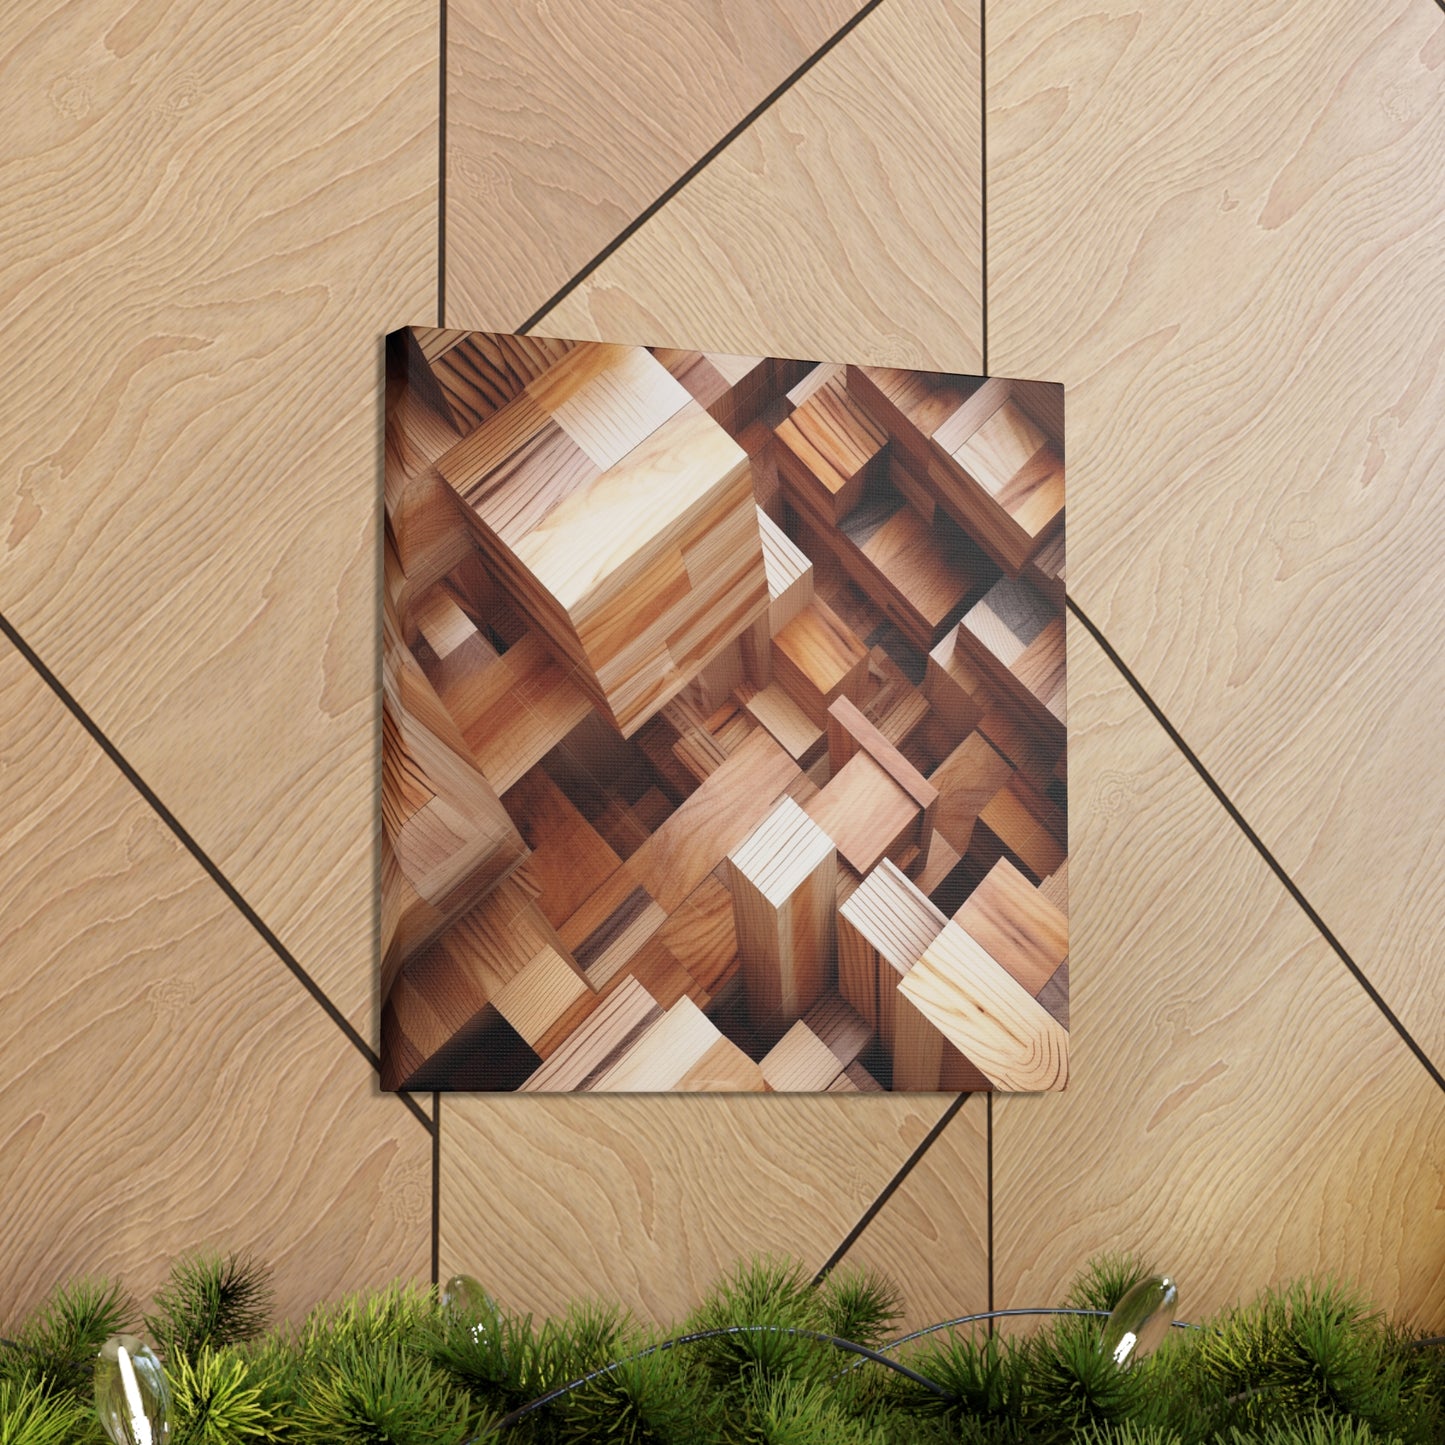 "Geometric Wood Art" Wall Art - Weave Got Gifts - Unique Gifts You Won’t Find Anywhere Else!